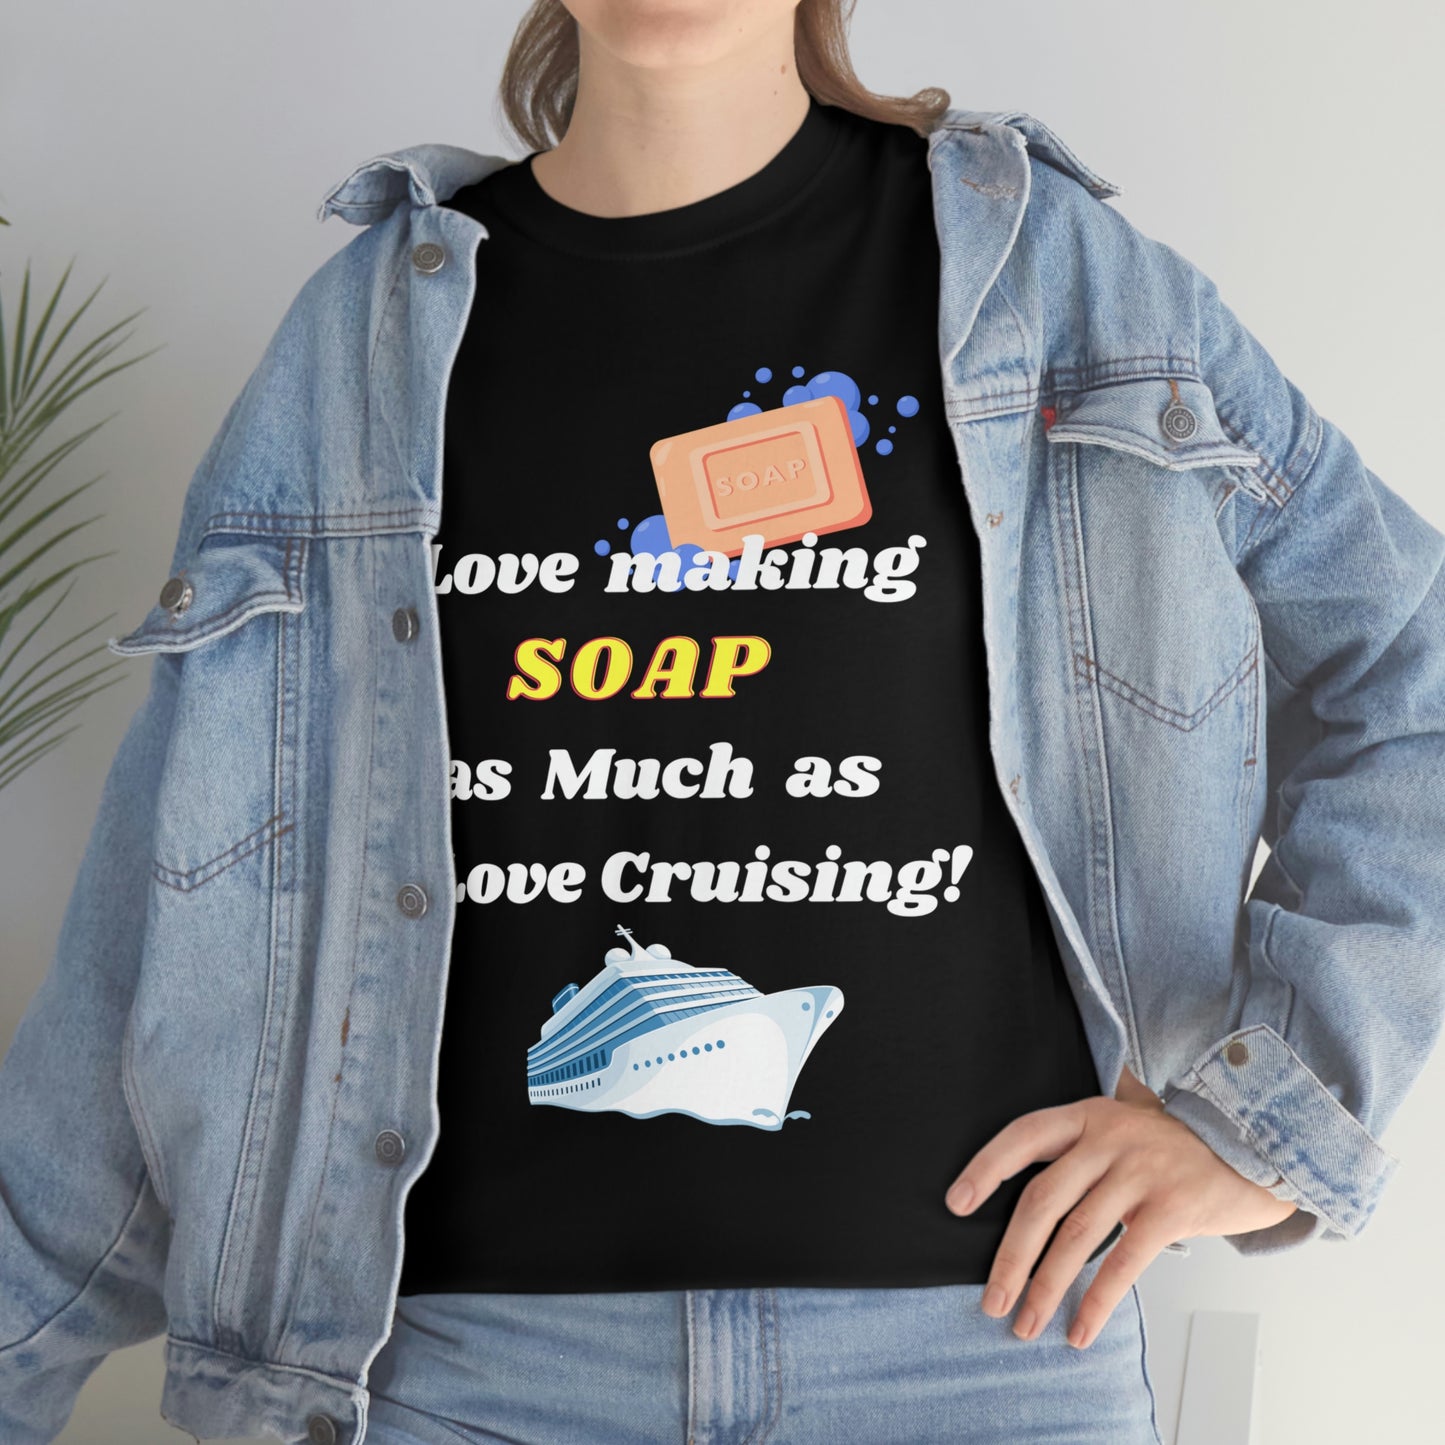 Soap Making and Cruising